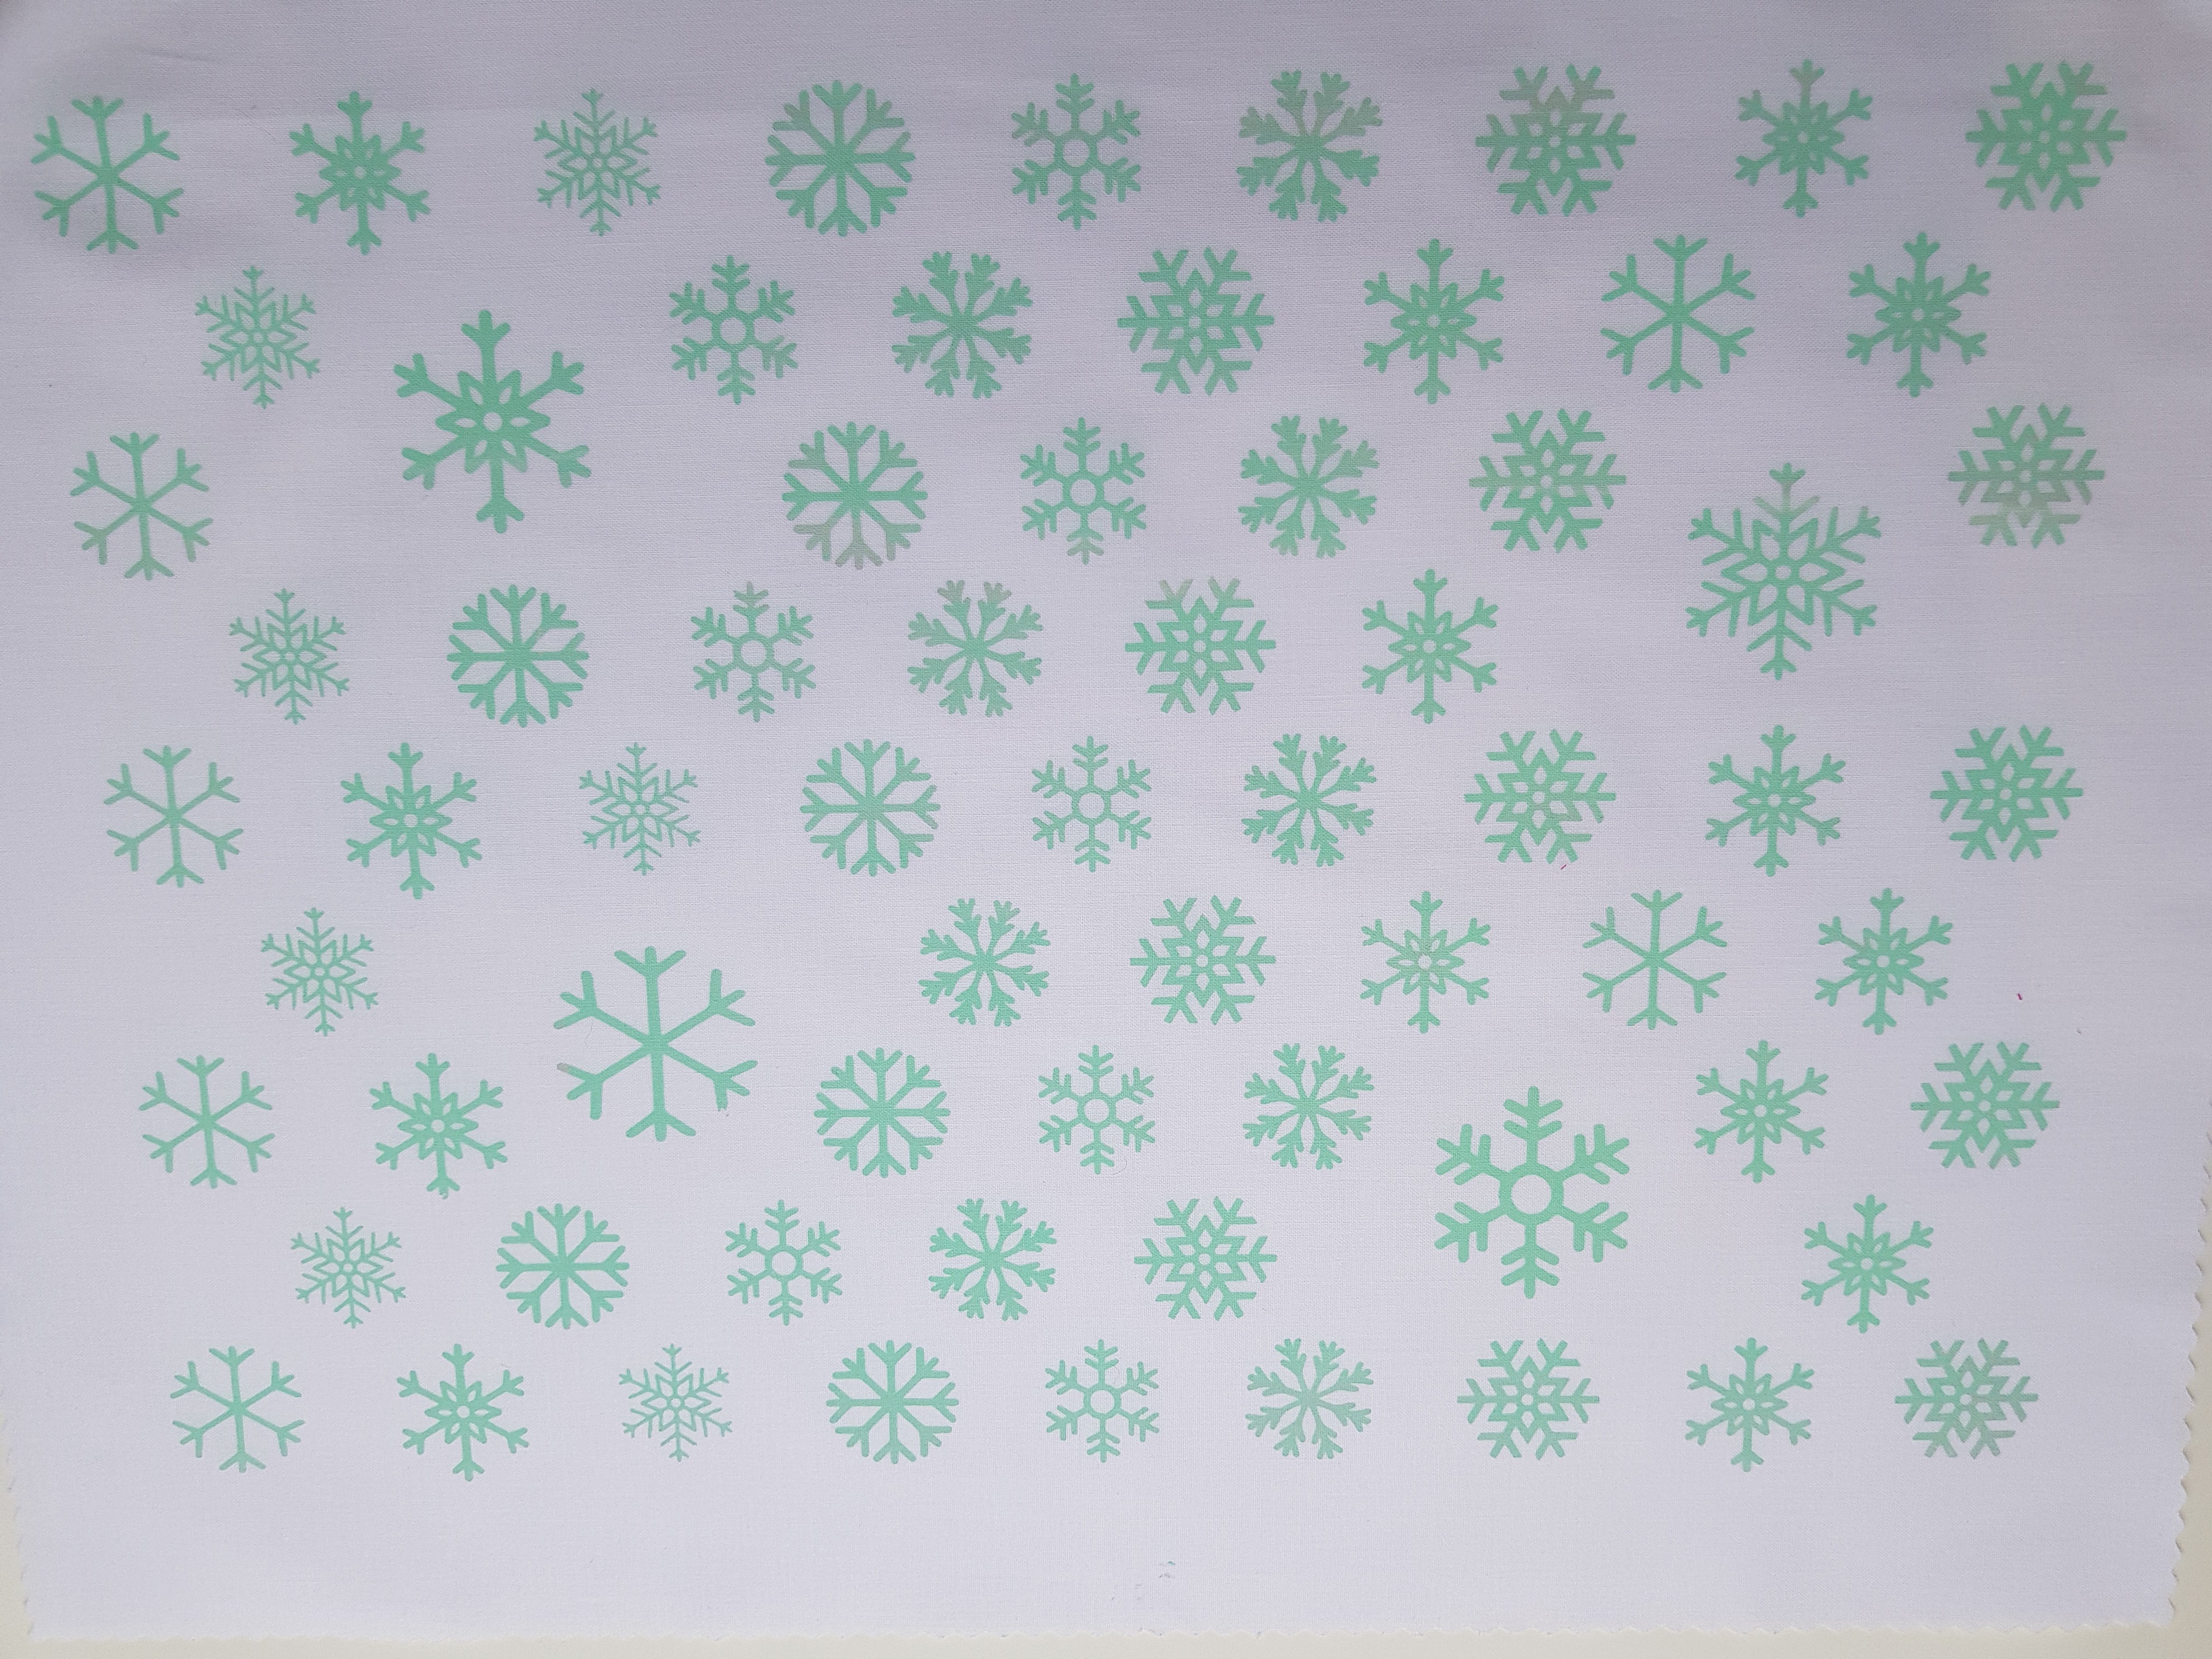 SNOWFLAKES - A snowflake is not just for Christmas - Screen Printed Kona Cotton Fabric - snowflakes